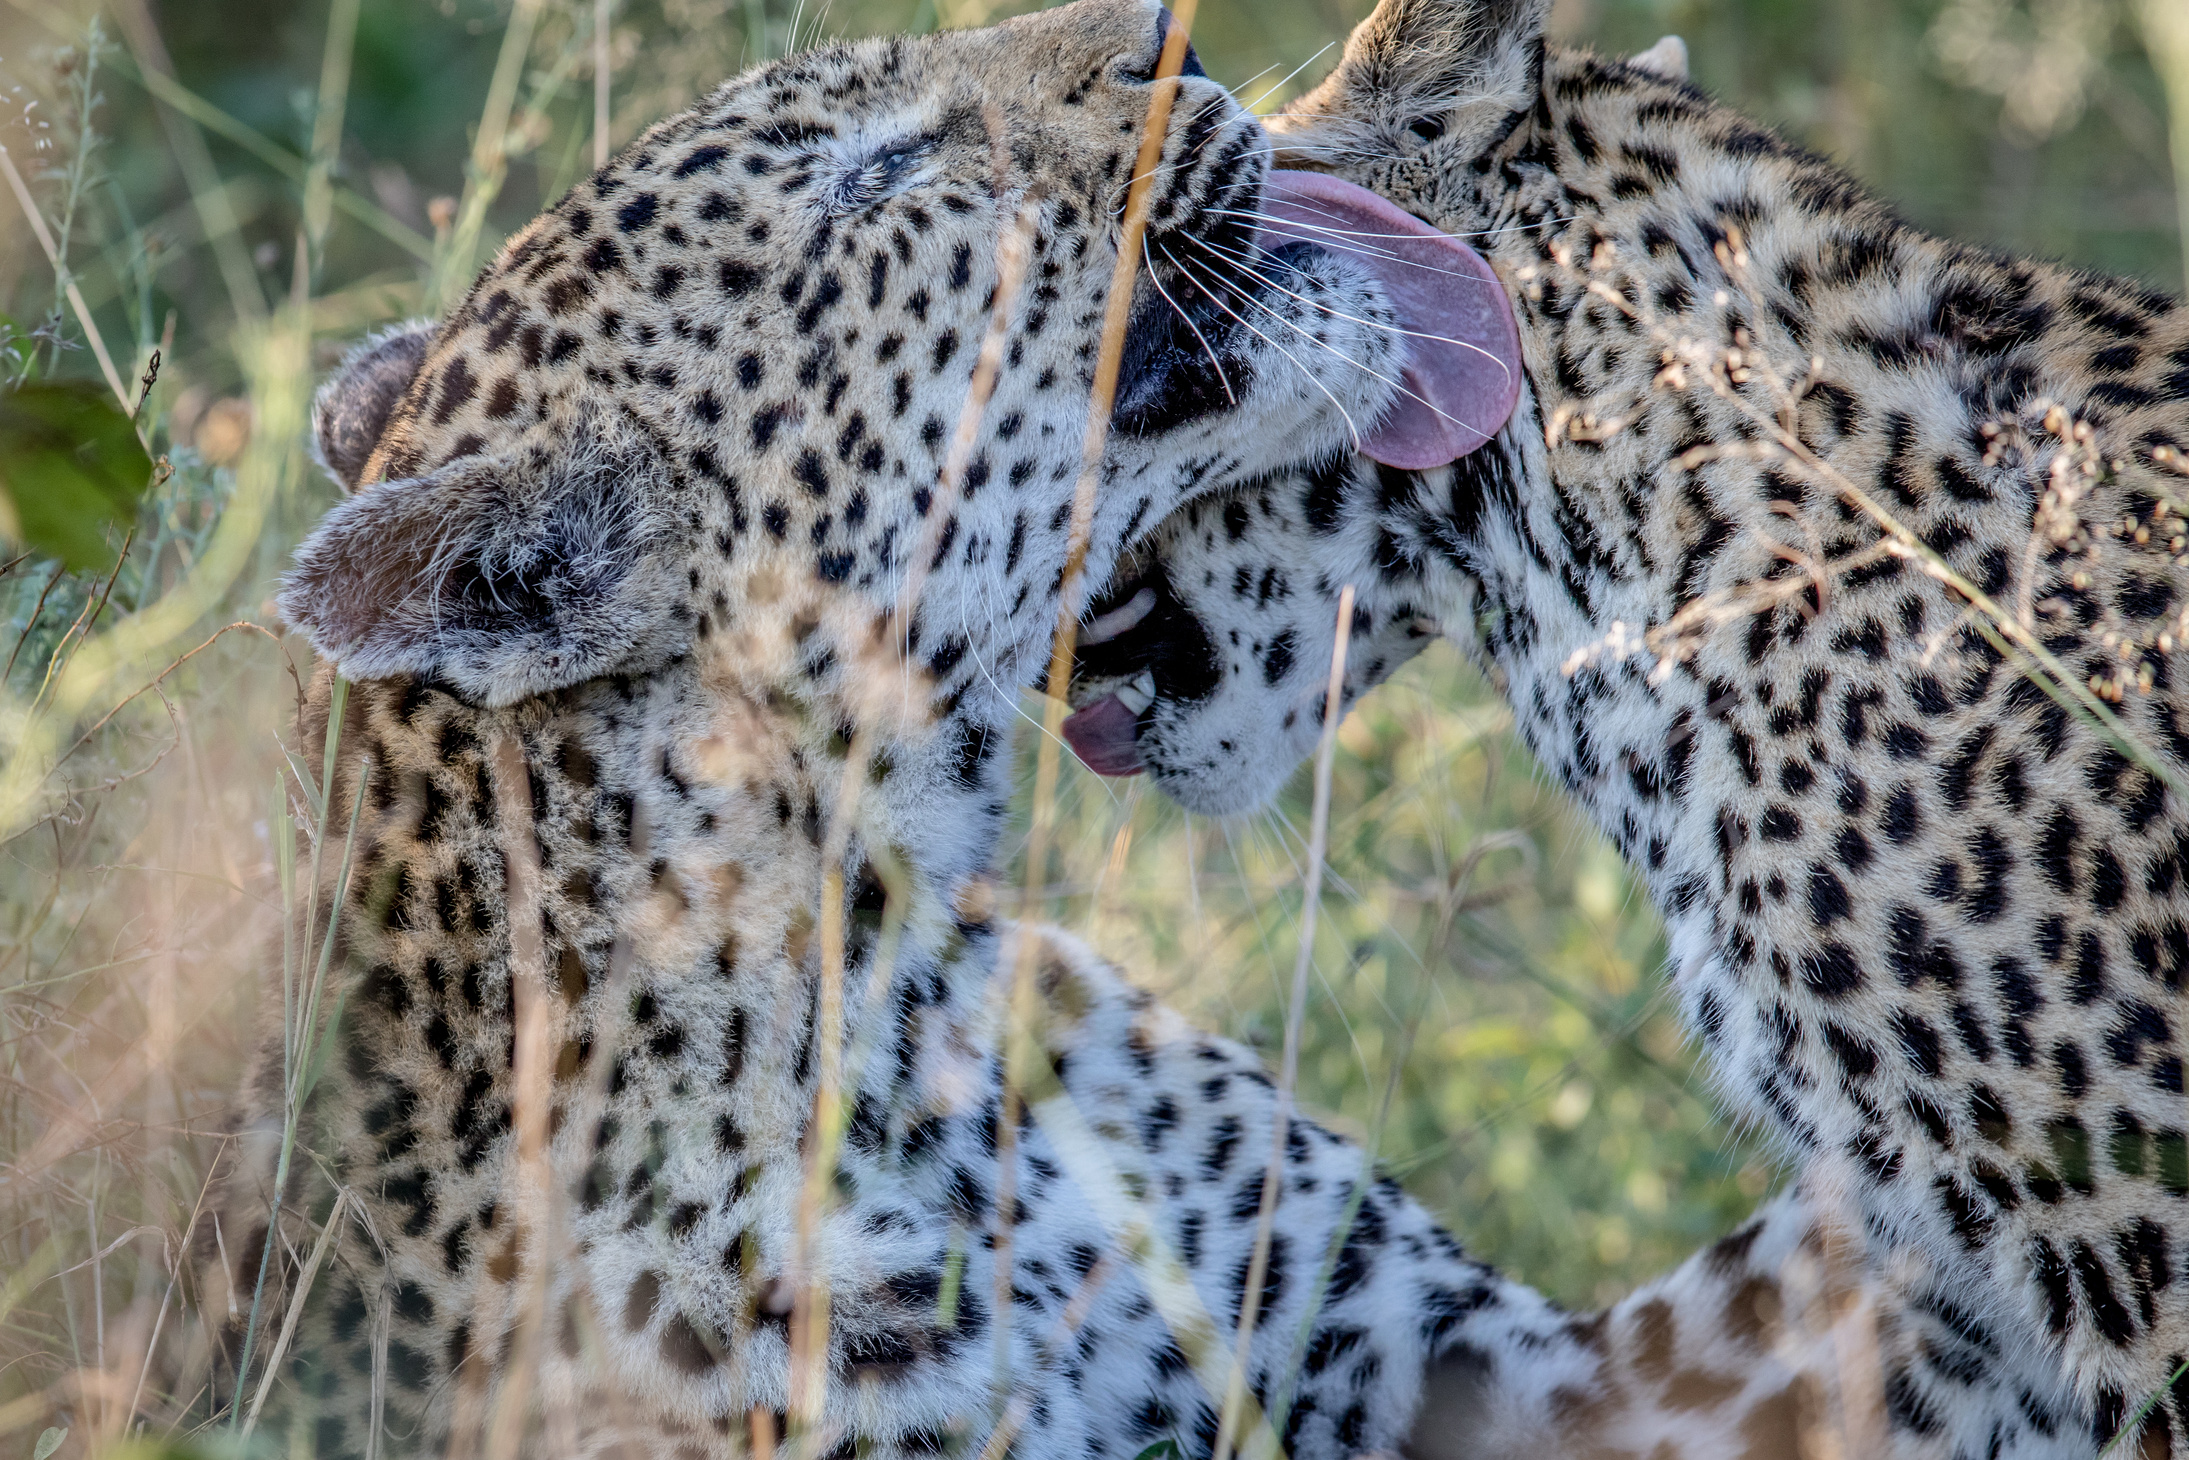 Two Leopards grooming each other.